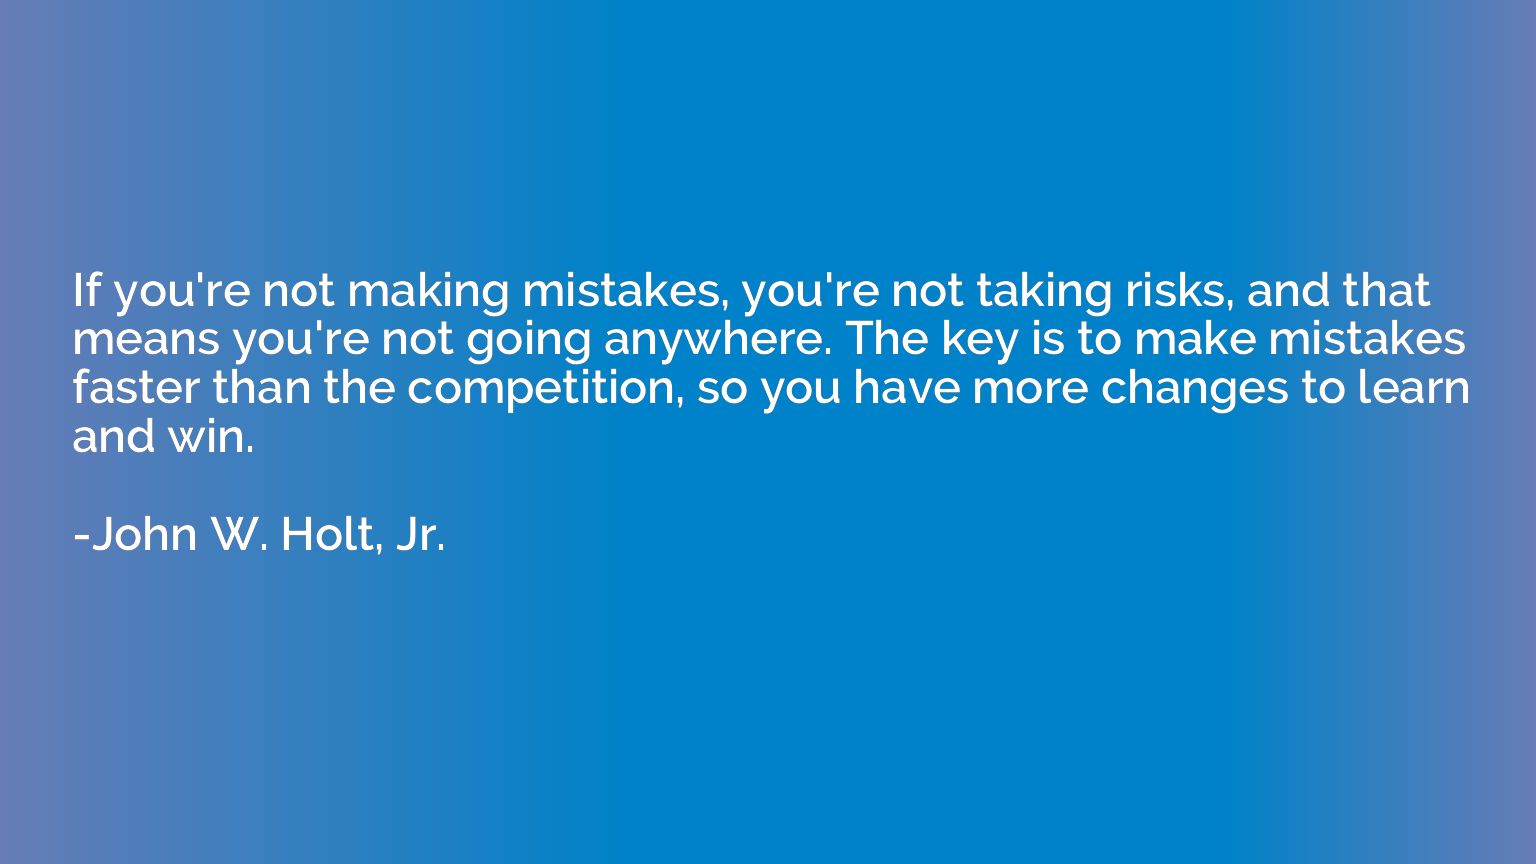 If you're not making mistakes, you're not taking risks, and 